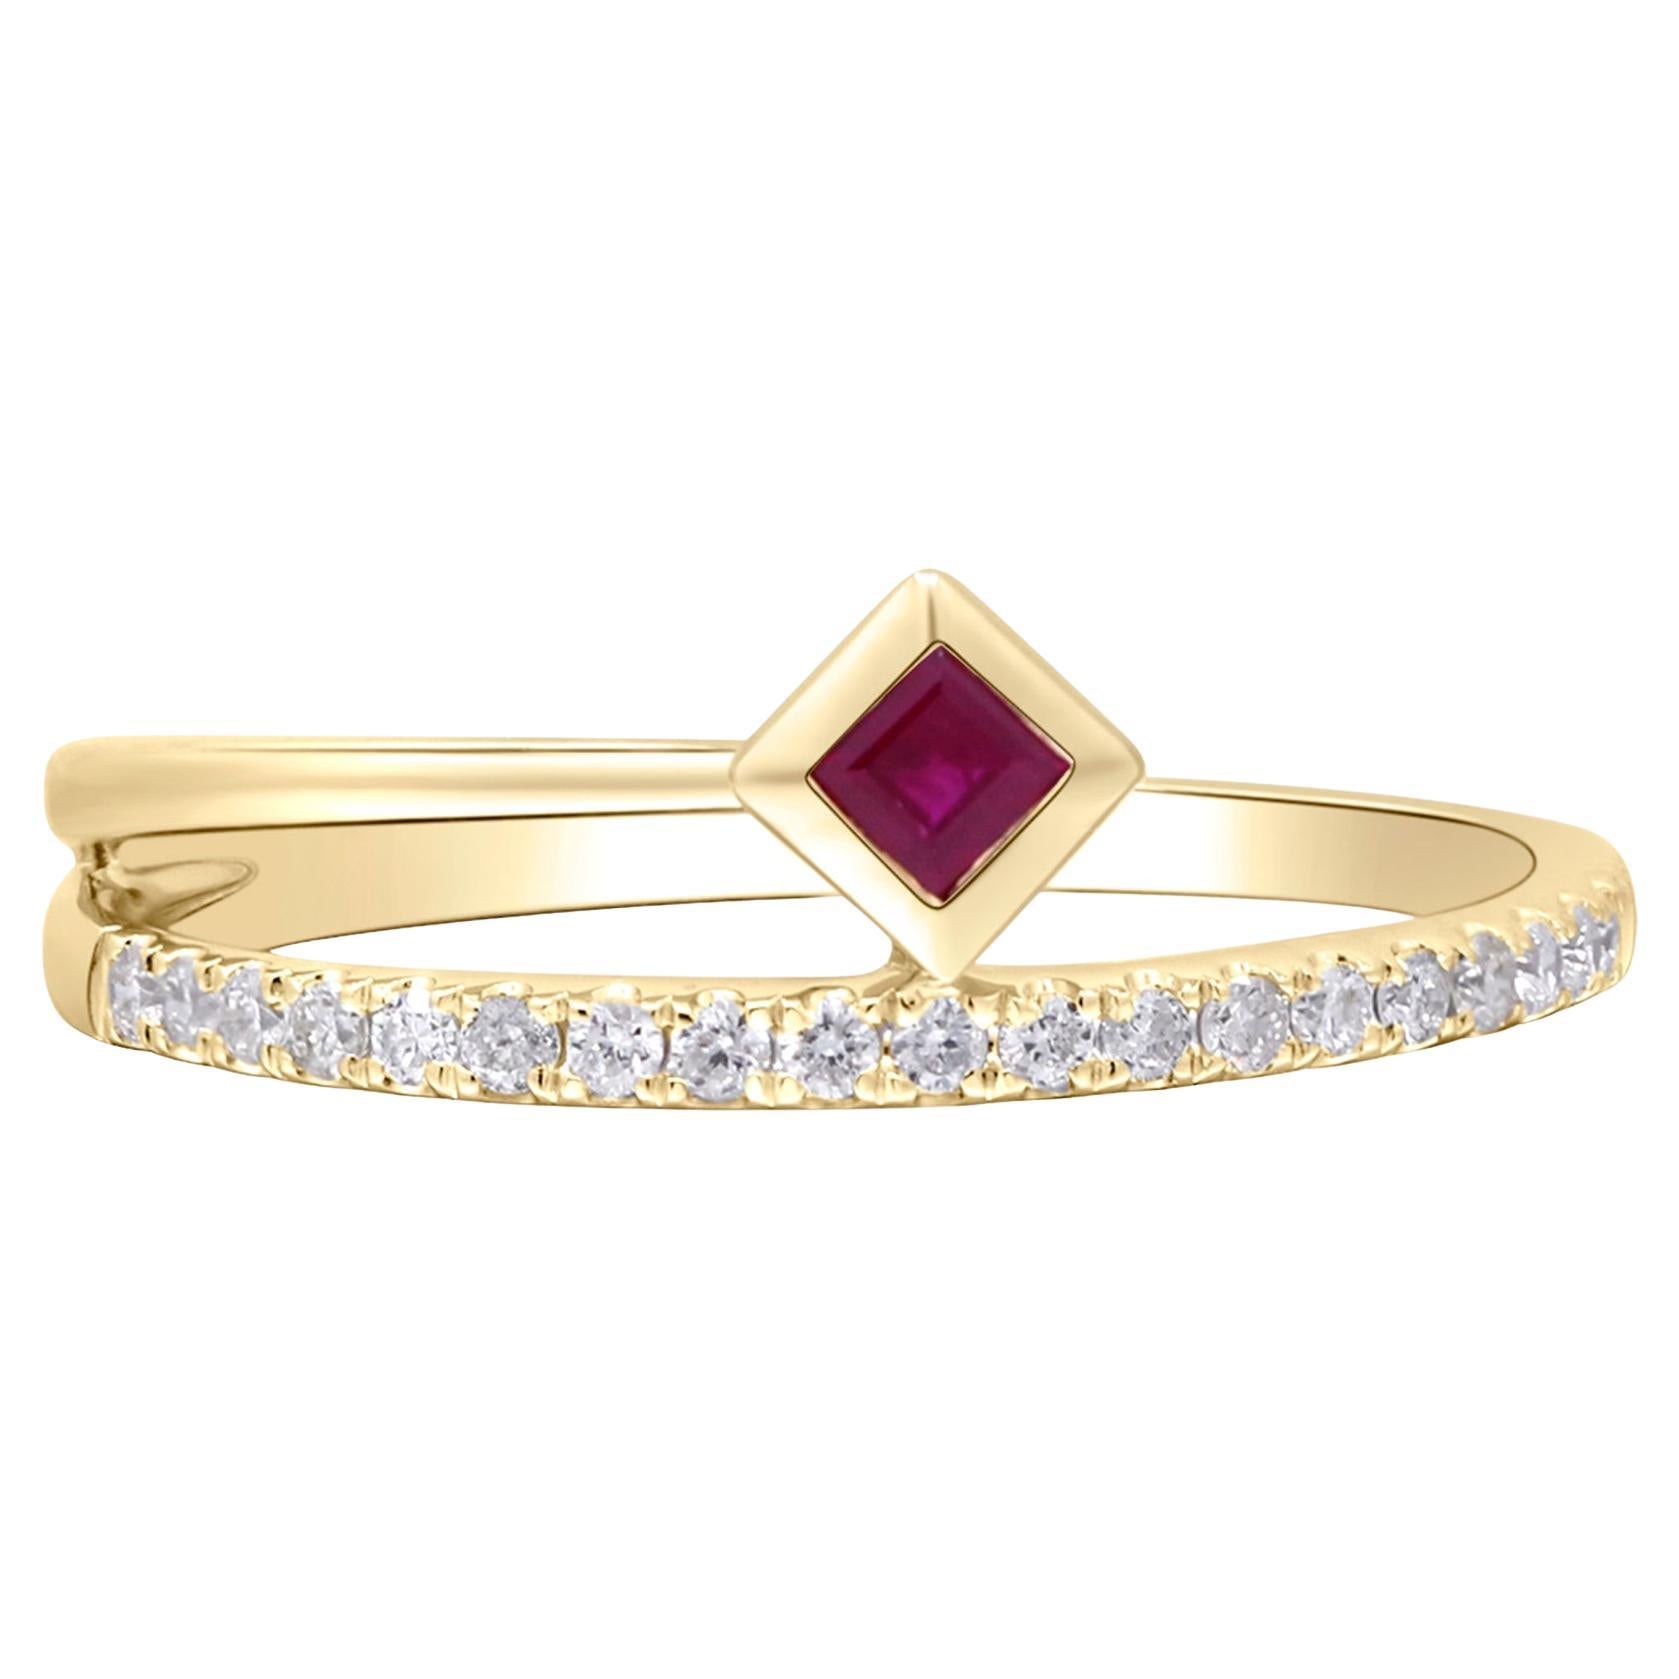 0.12 Carat Square-Cut Ruby With Diamond Accents 14K Yellow Gold Ring For Sale